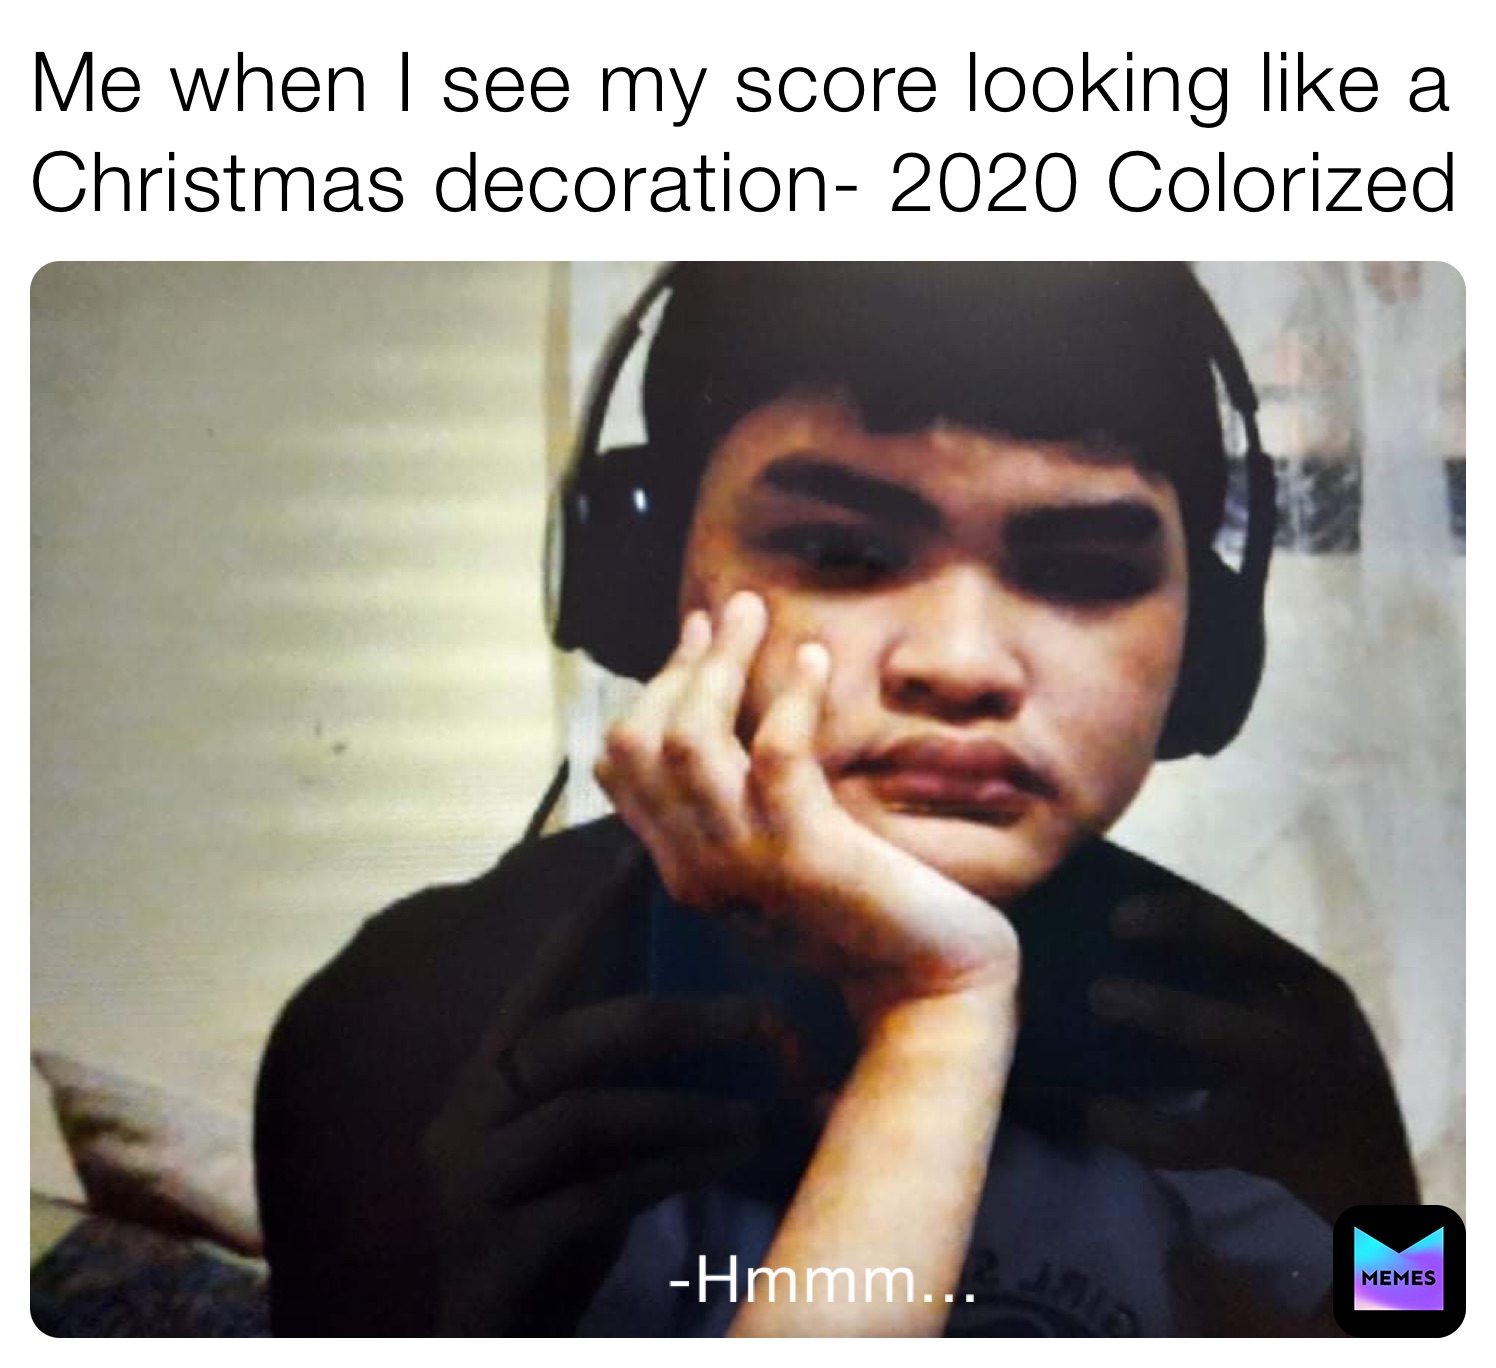 Me when I see my score looking like a Christmas decoration- 2020 Colorized 